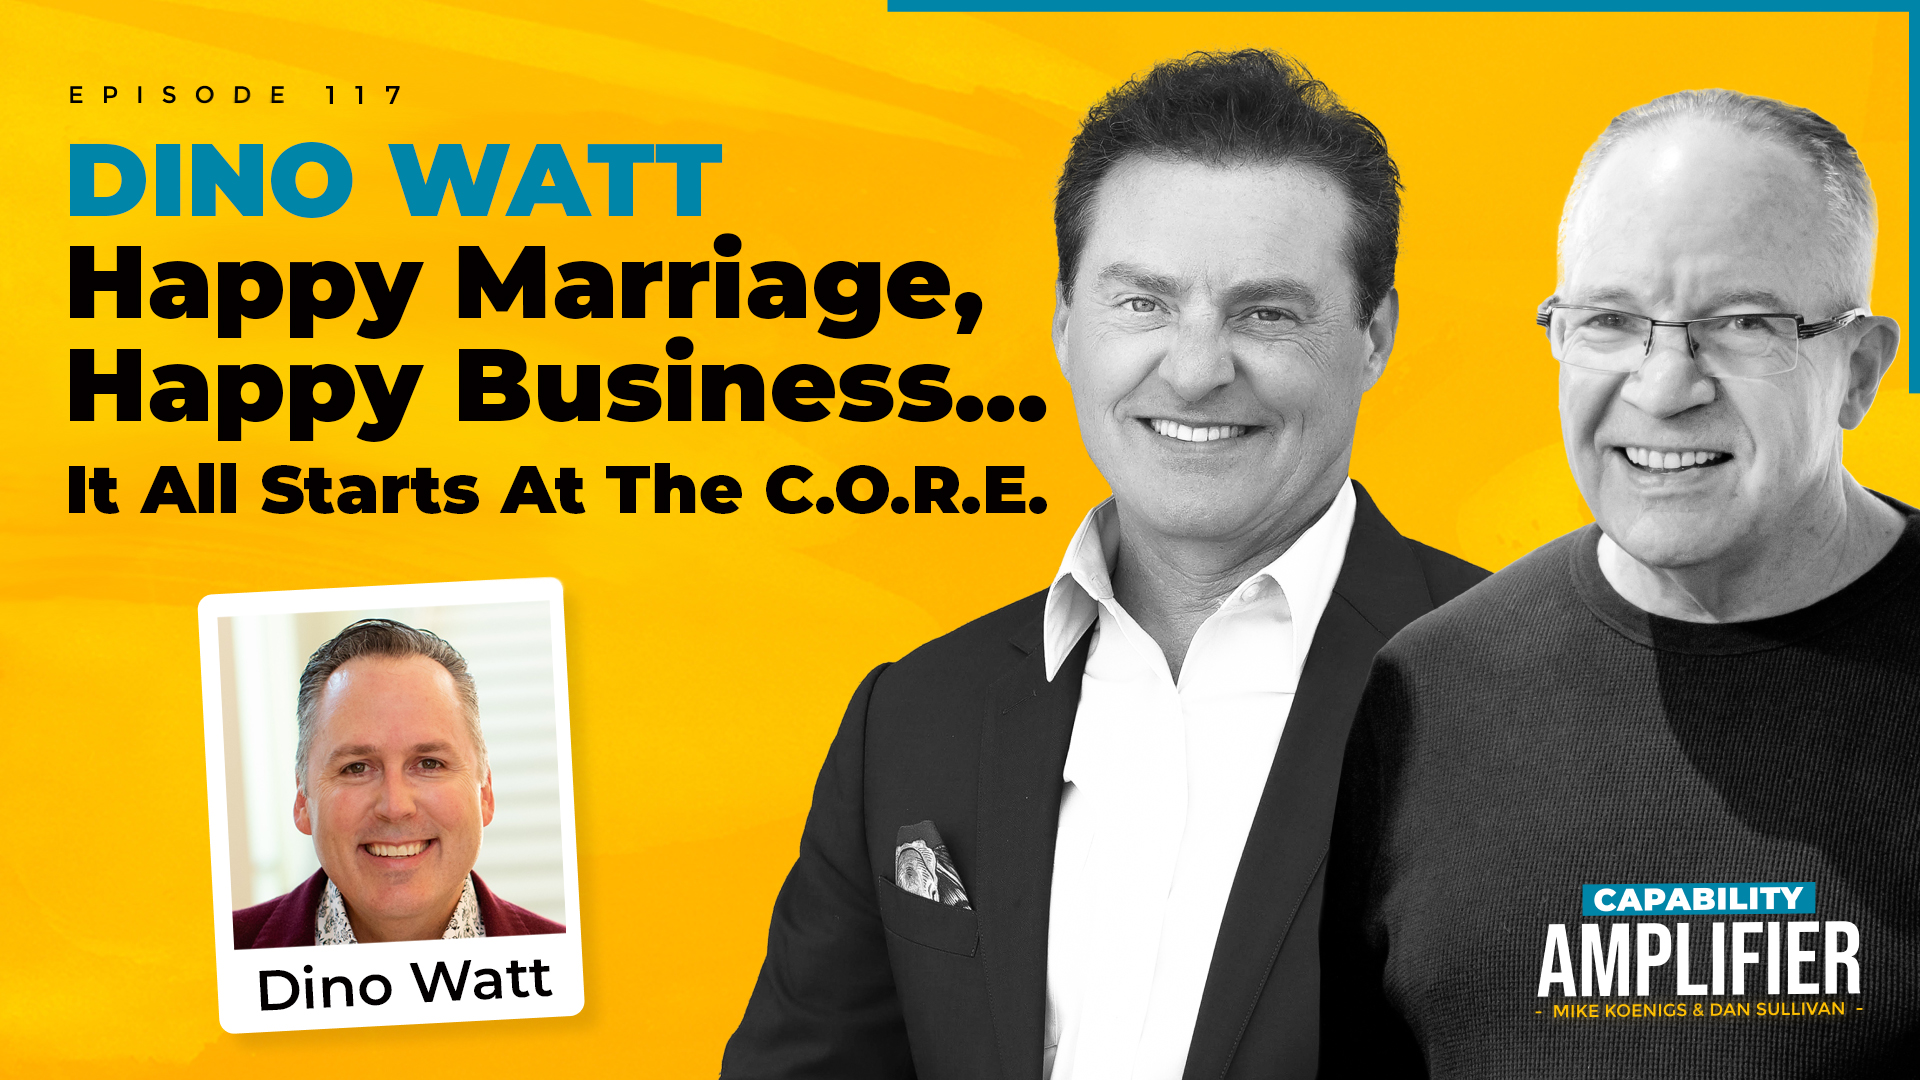 Episode 117 Art: Text reading "DINO WATT Happy Marriage, Happy Business... It All Starts at the C.O.R.E." on a yellow background with photos of Mike Koenigs, Dan Sullivan and Dino Watt